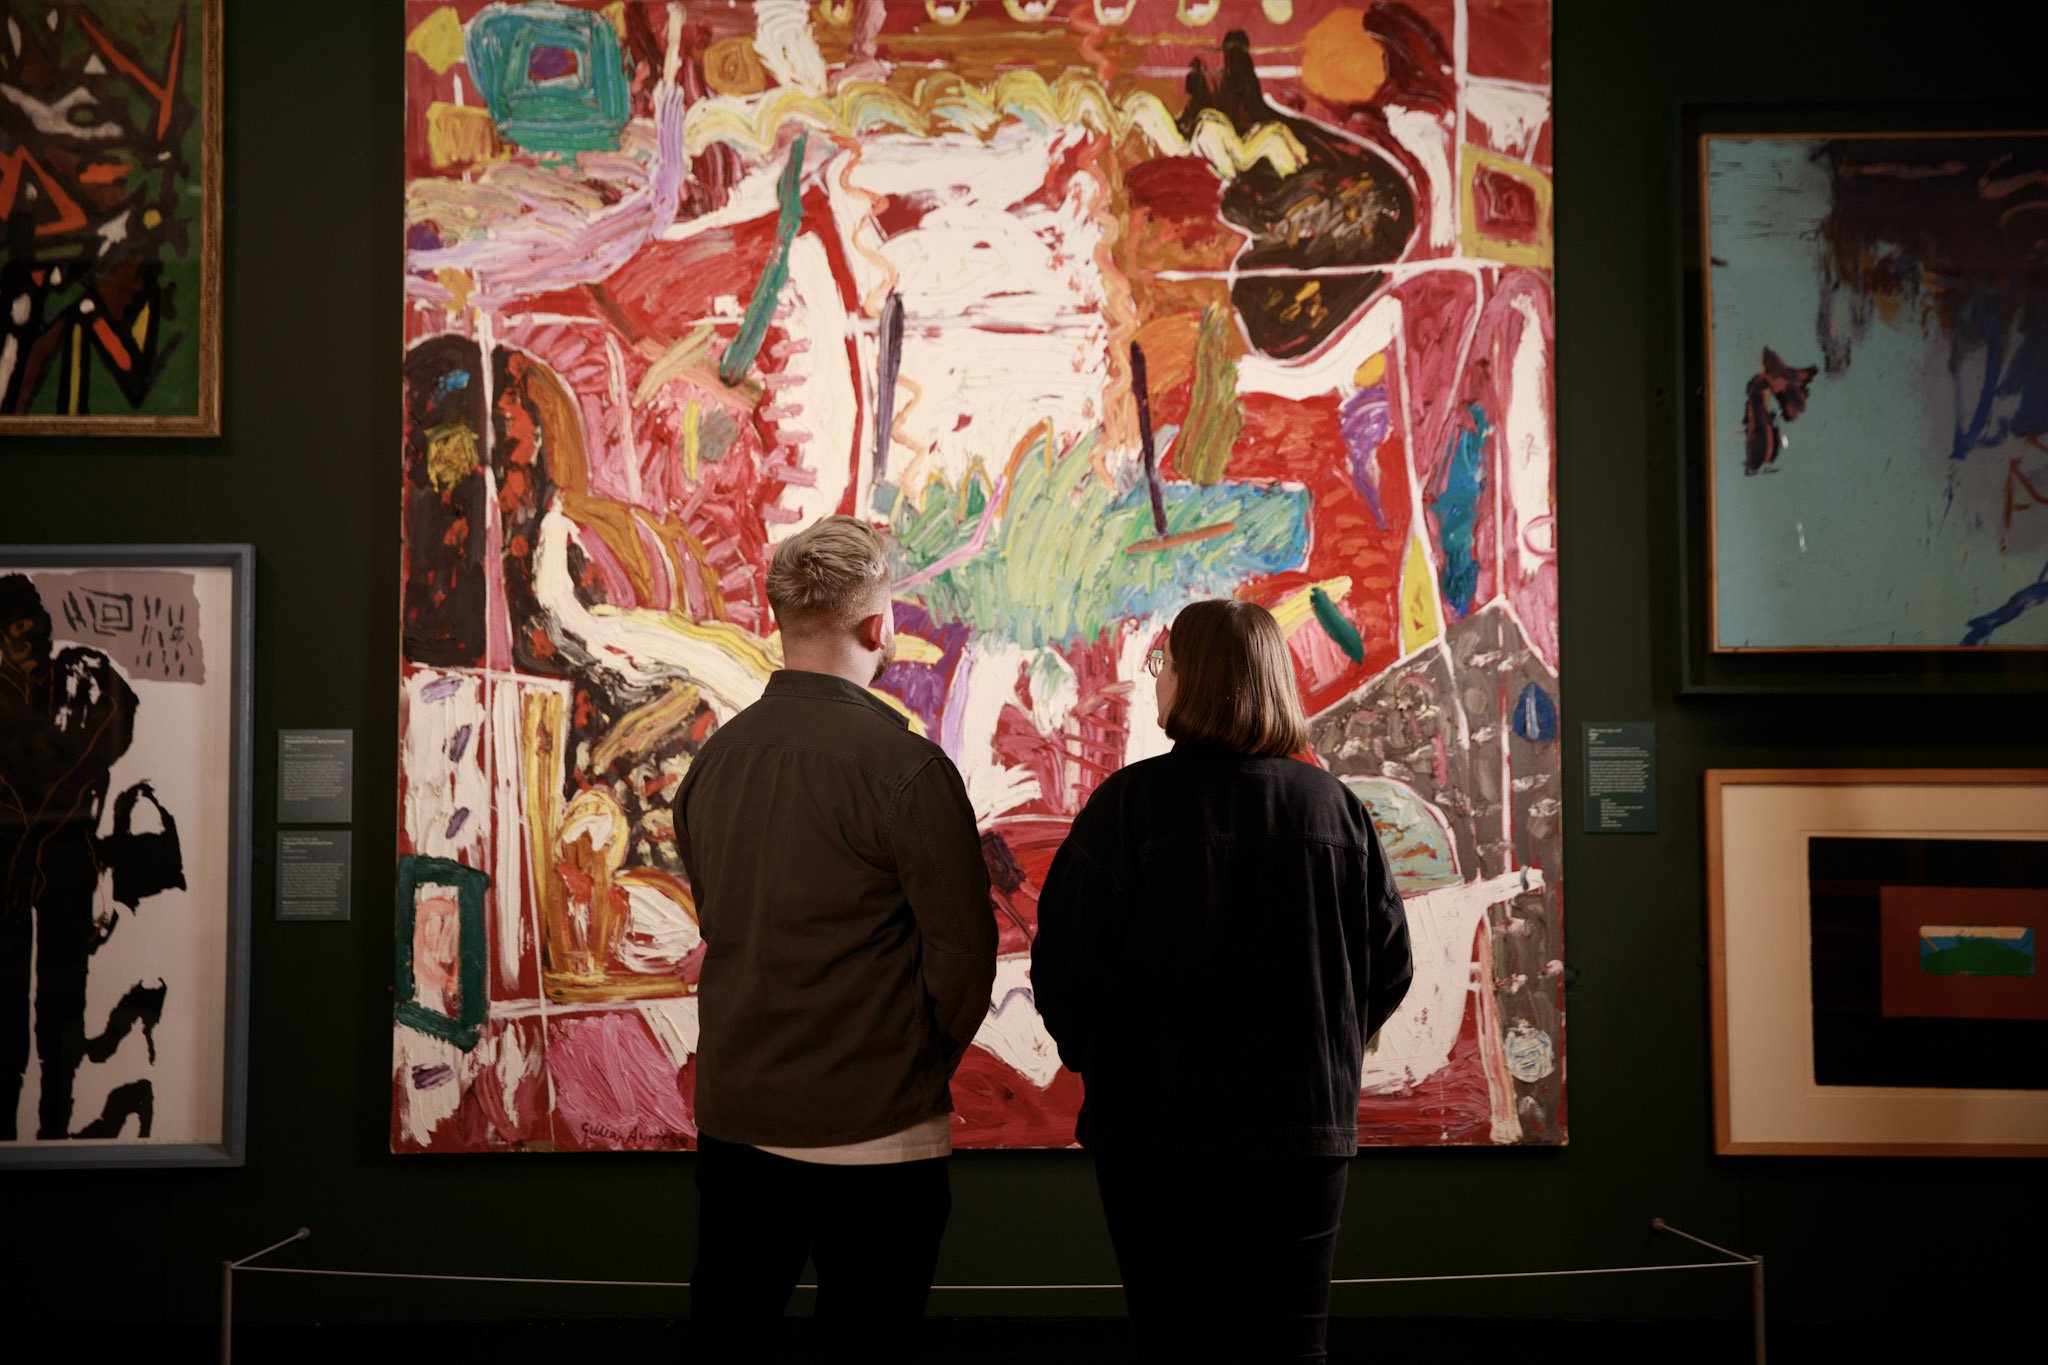 A man and woman looking at an abstract painting in an art gallery.